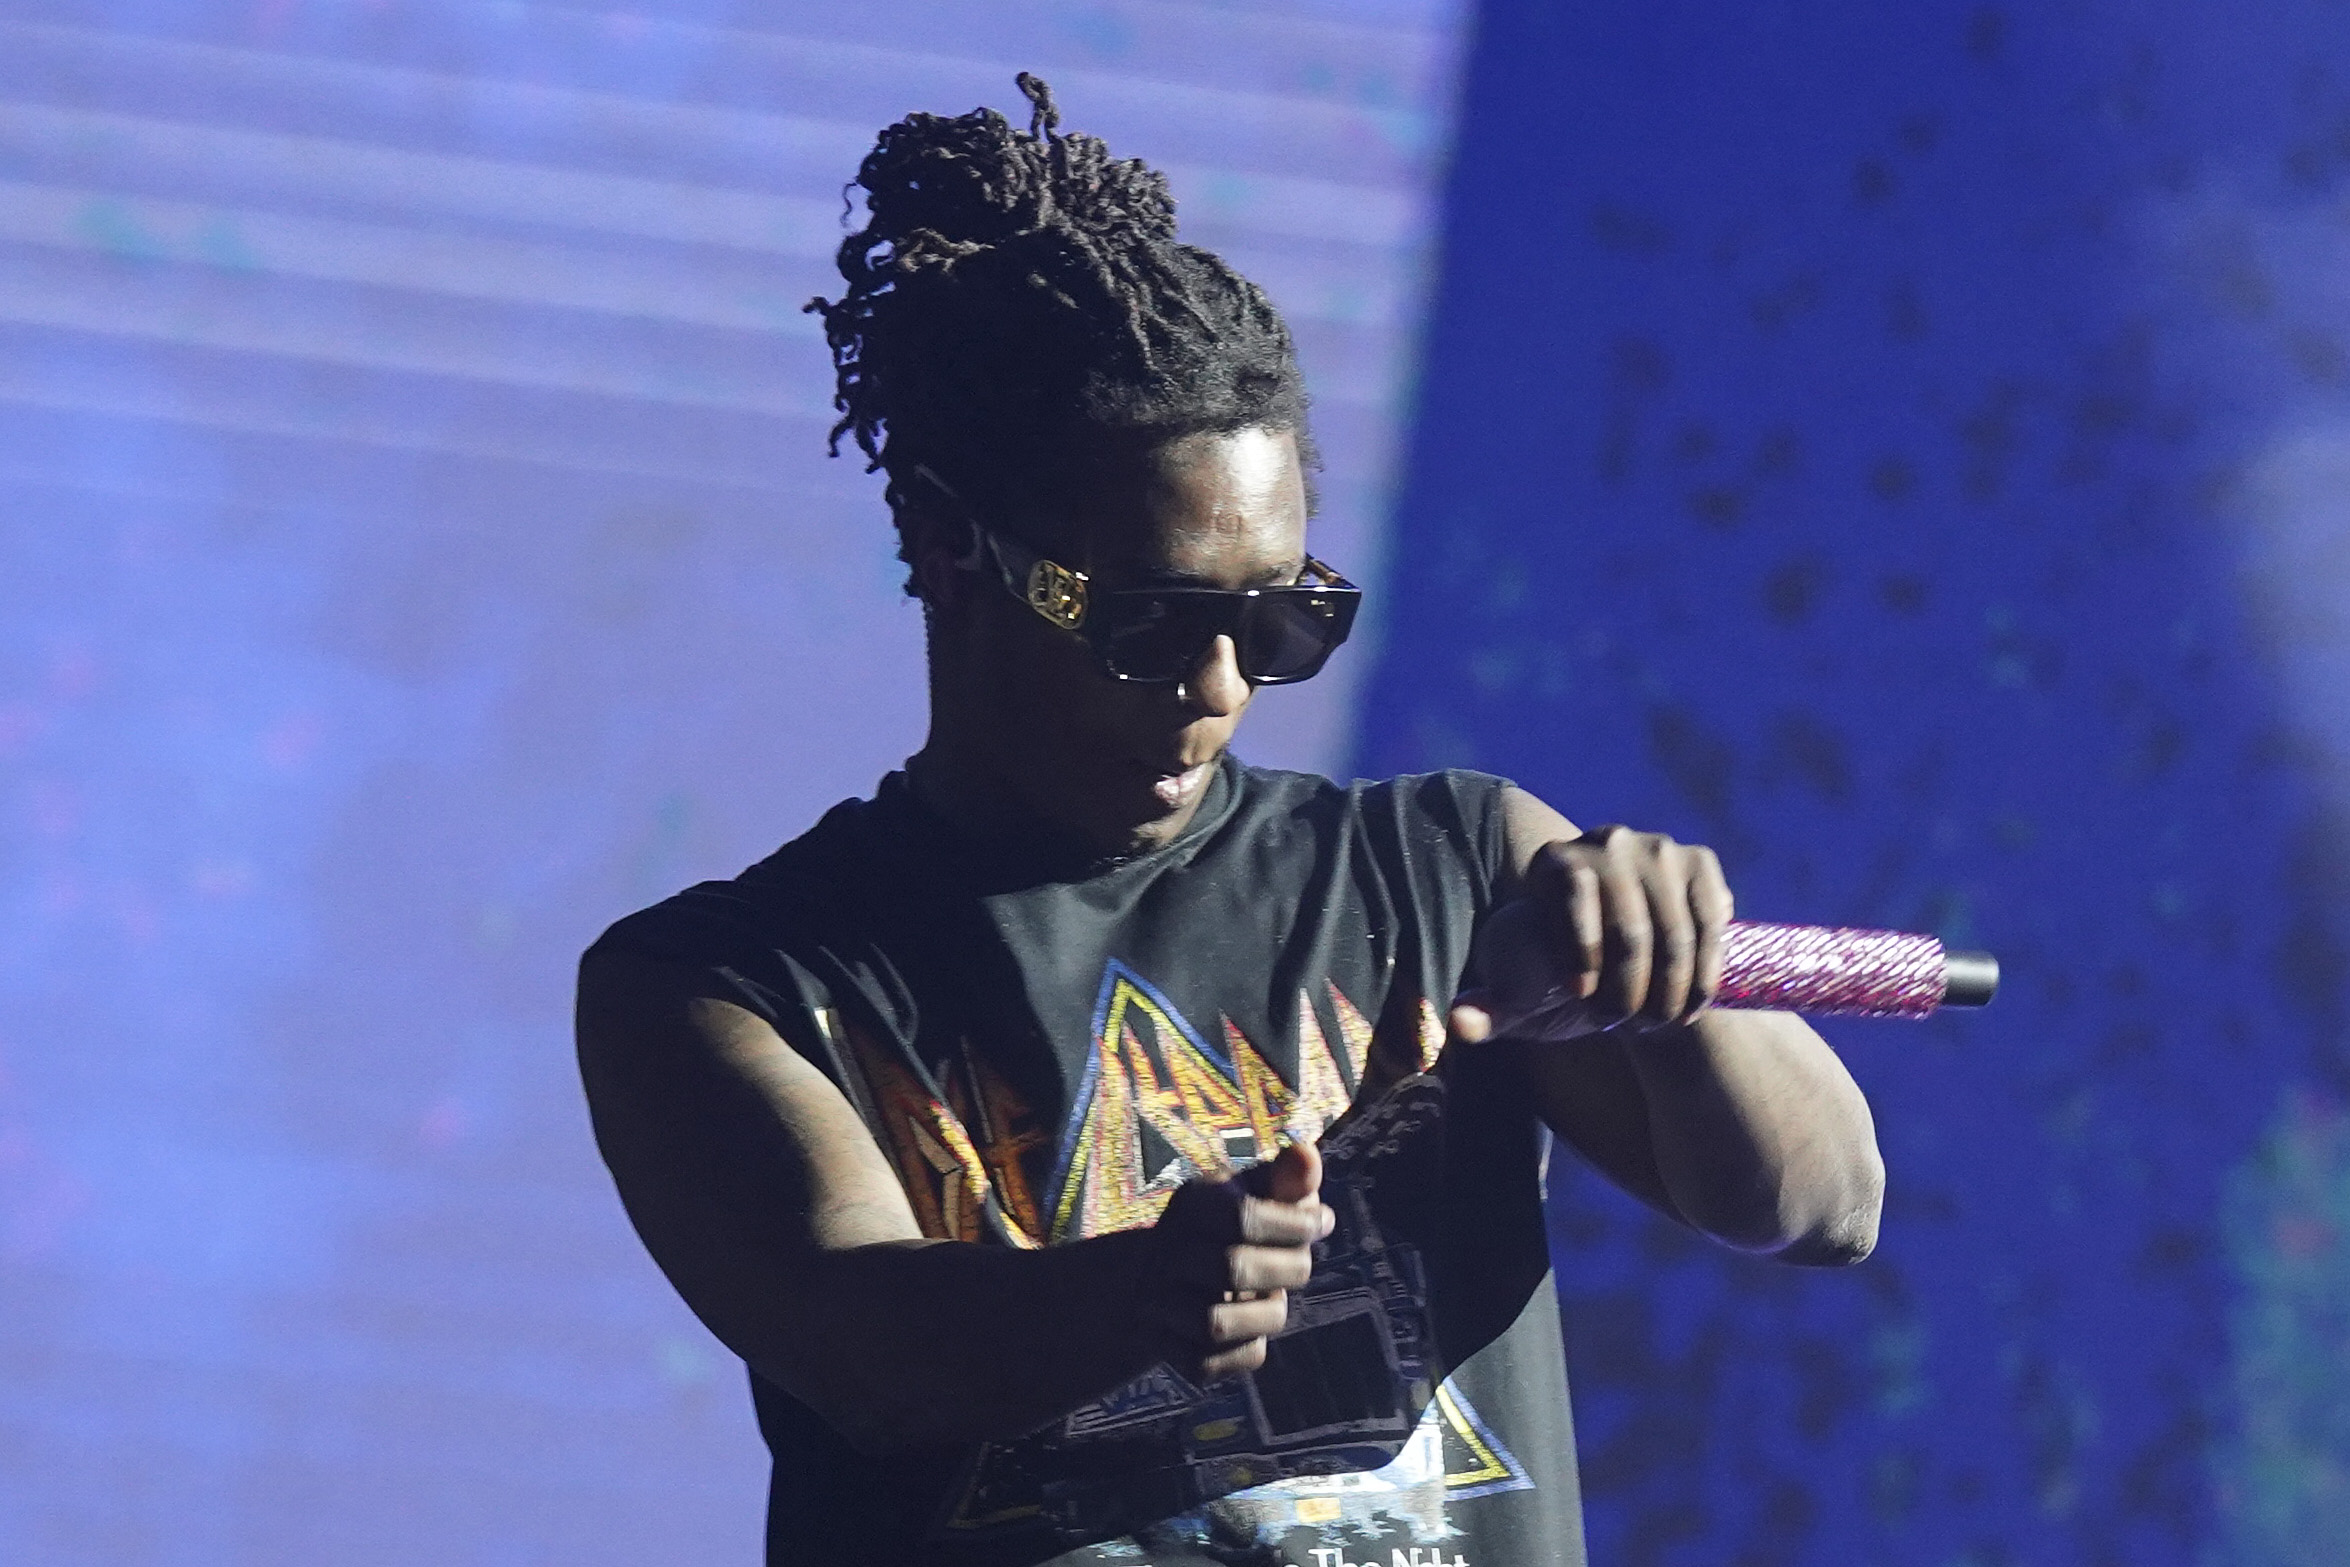 YSL Artist To Preview New Music Featuring Young Thug On Tour